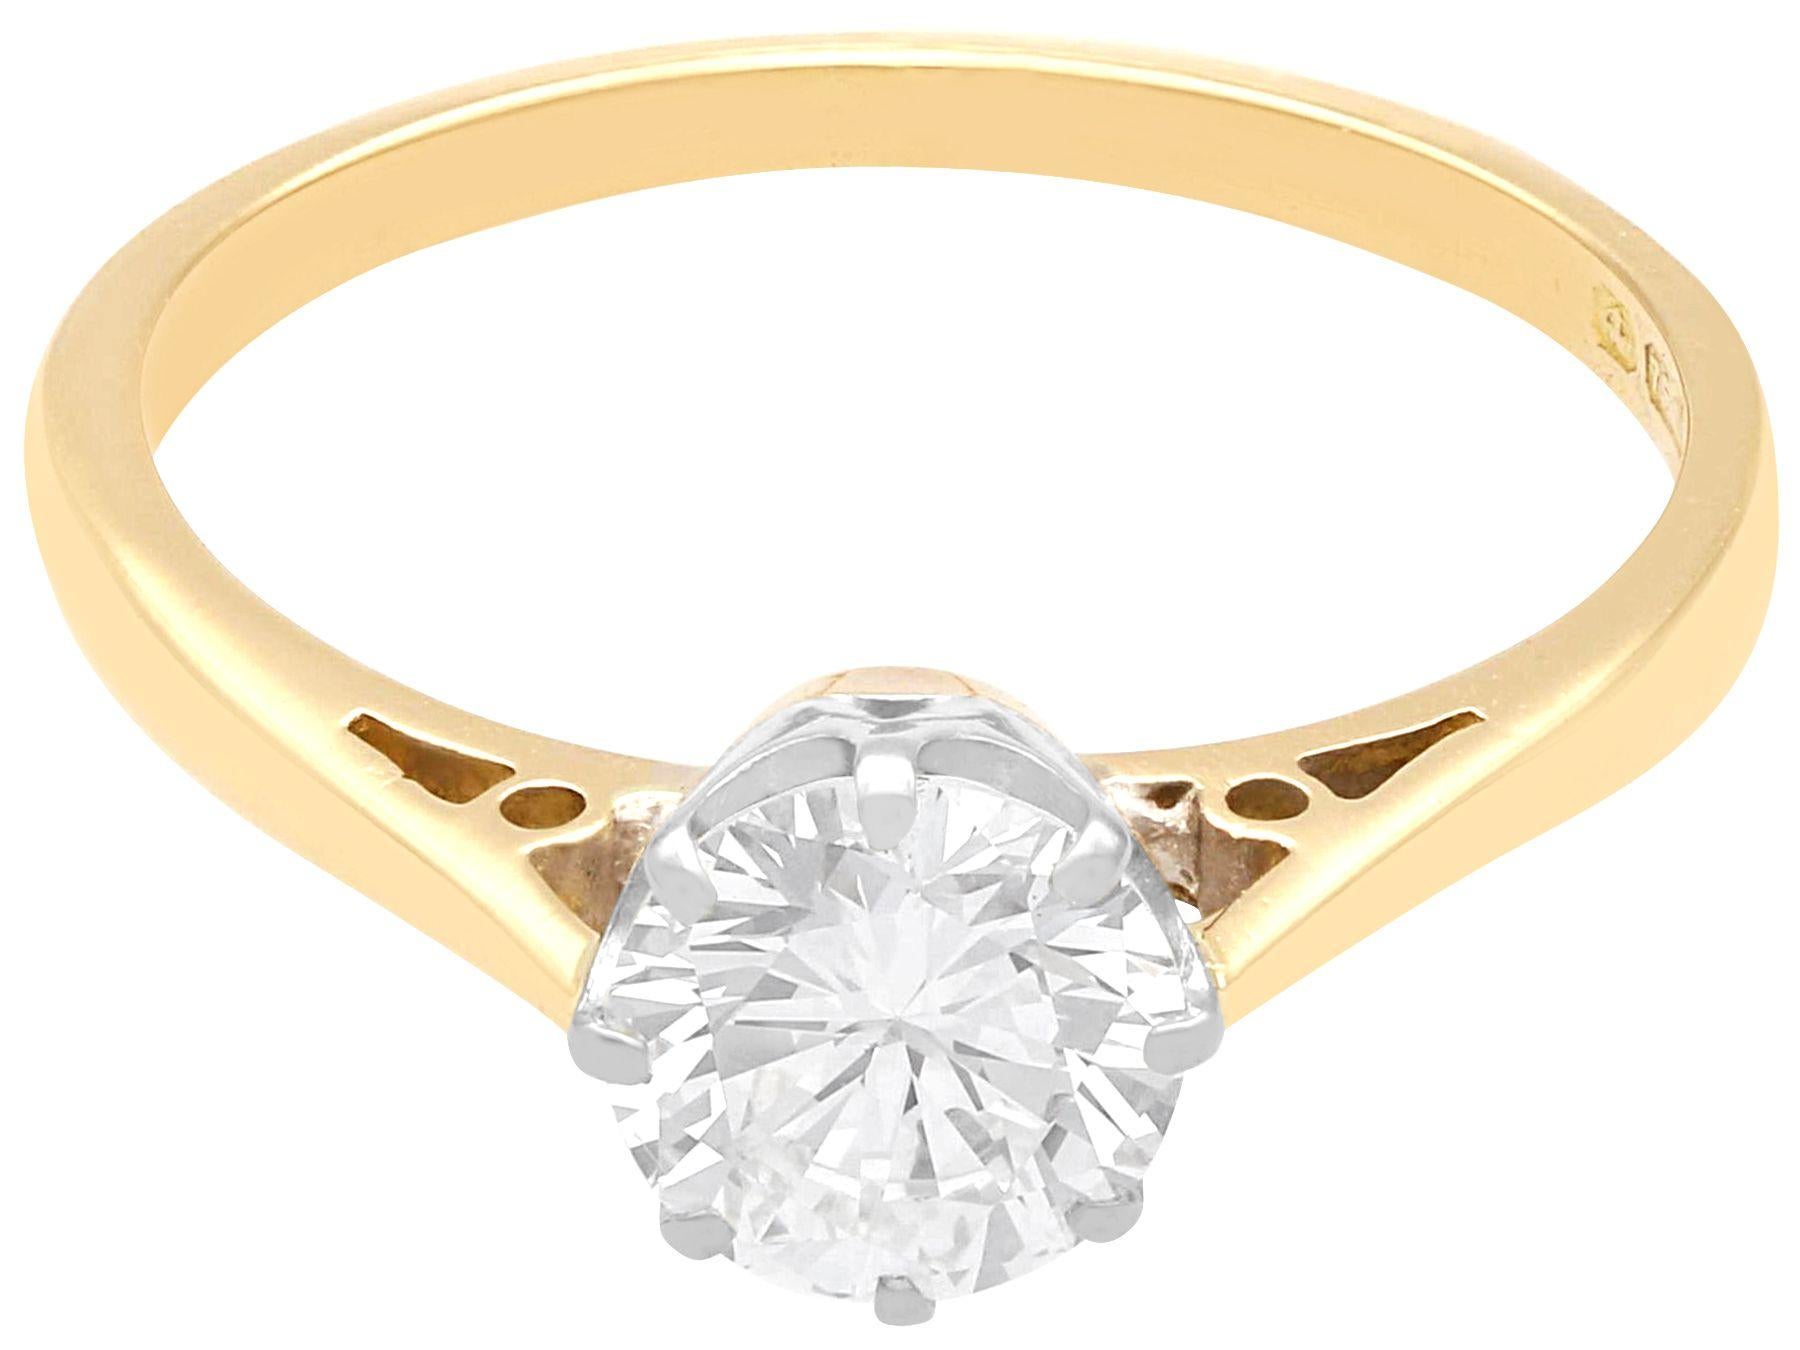 Vintage 1.12 Carat Diamond and Yellow Gold Solitaire Ring In Excellent Condition For Sale In Jesmond, Newcastle Upon Tyne